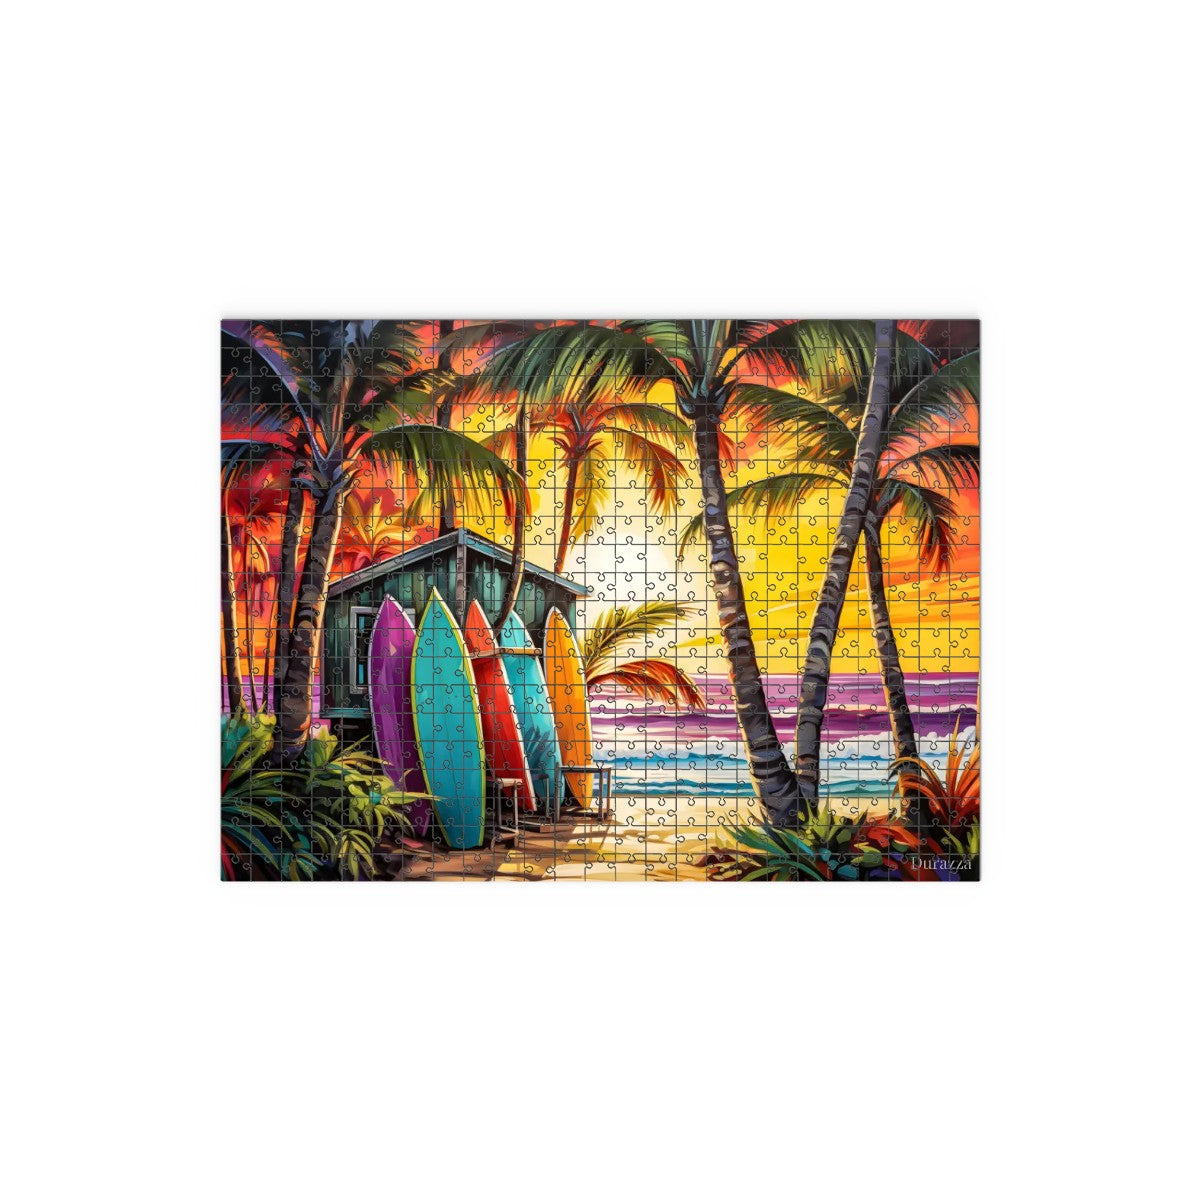 Surfers Dream Wooden Jigsaw Puzzle: 500 or 1000 Piece